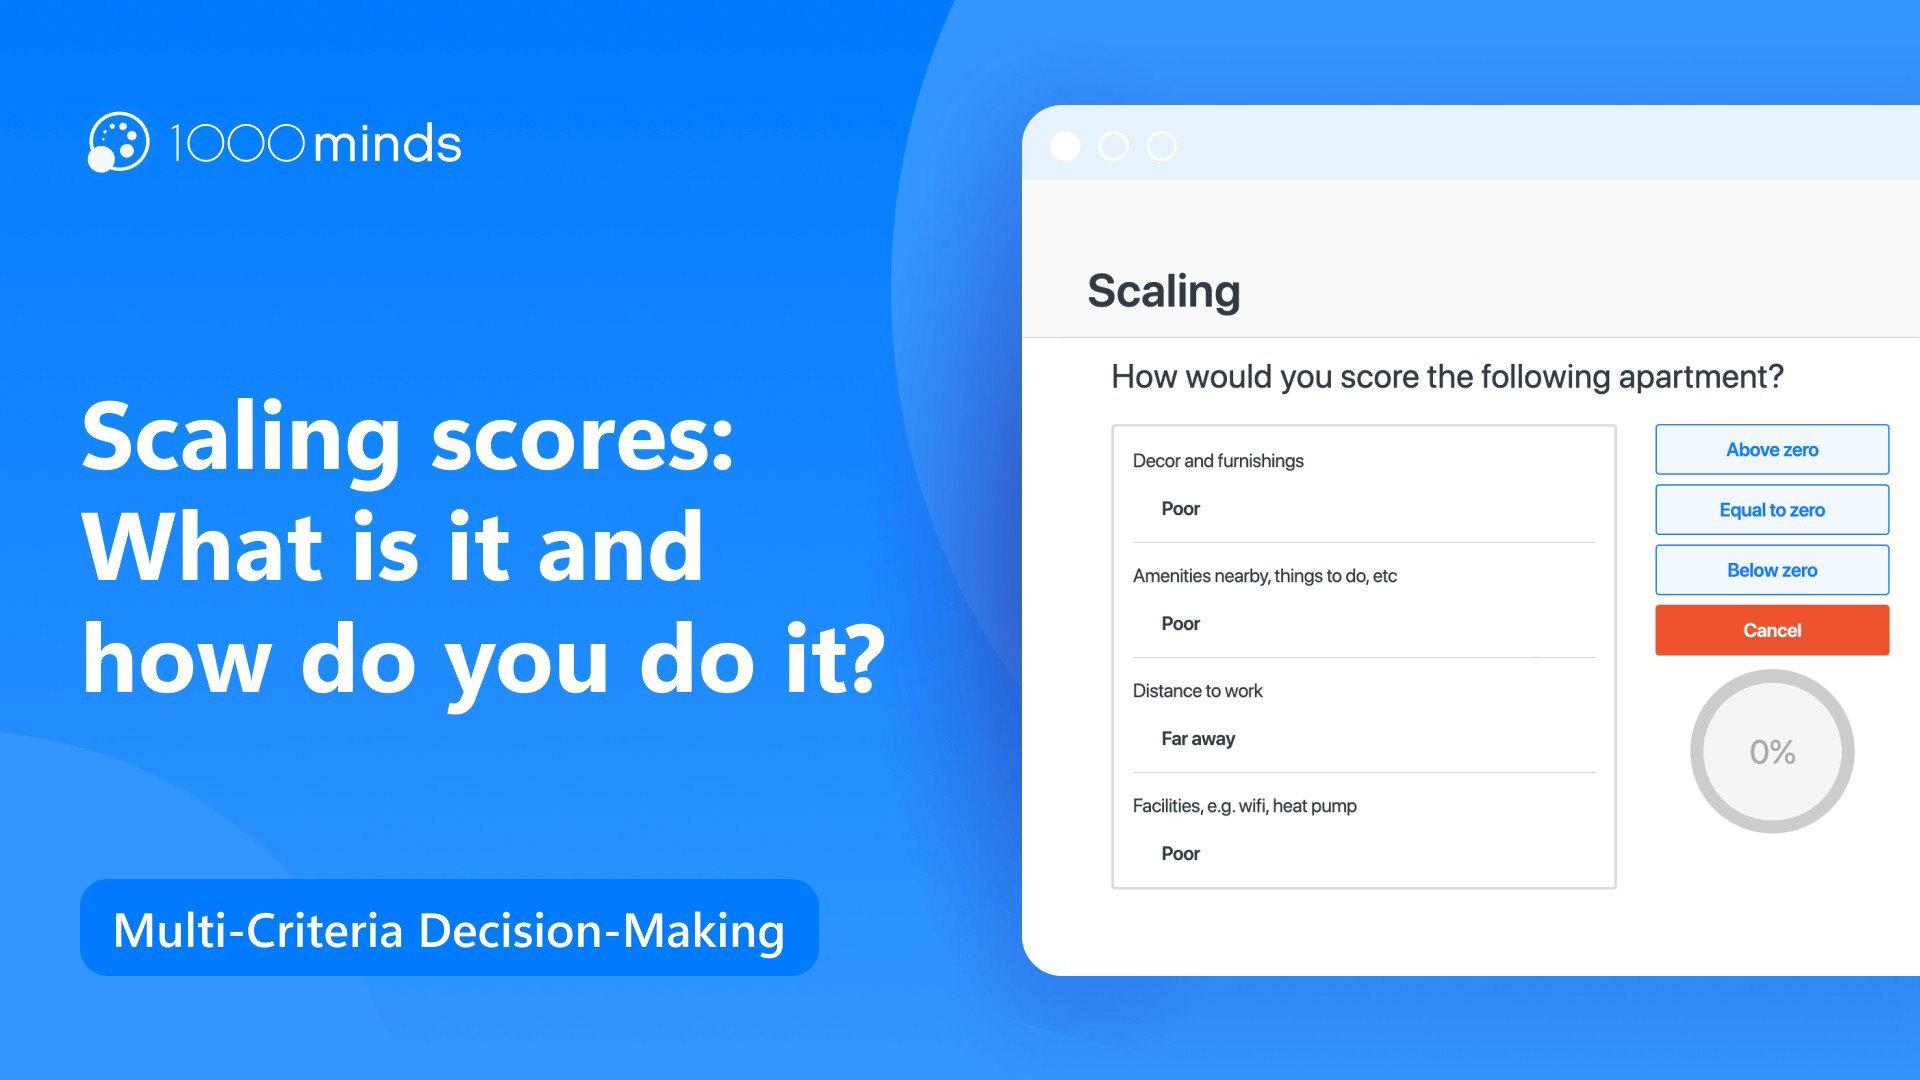 Scaling scores: what is it and how do you do it?